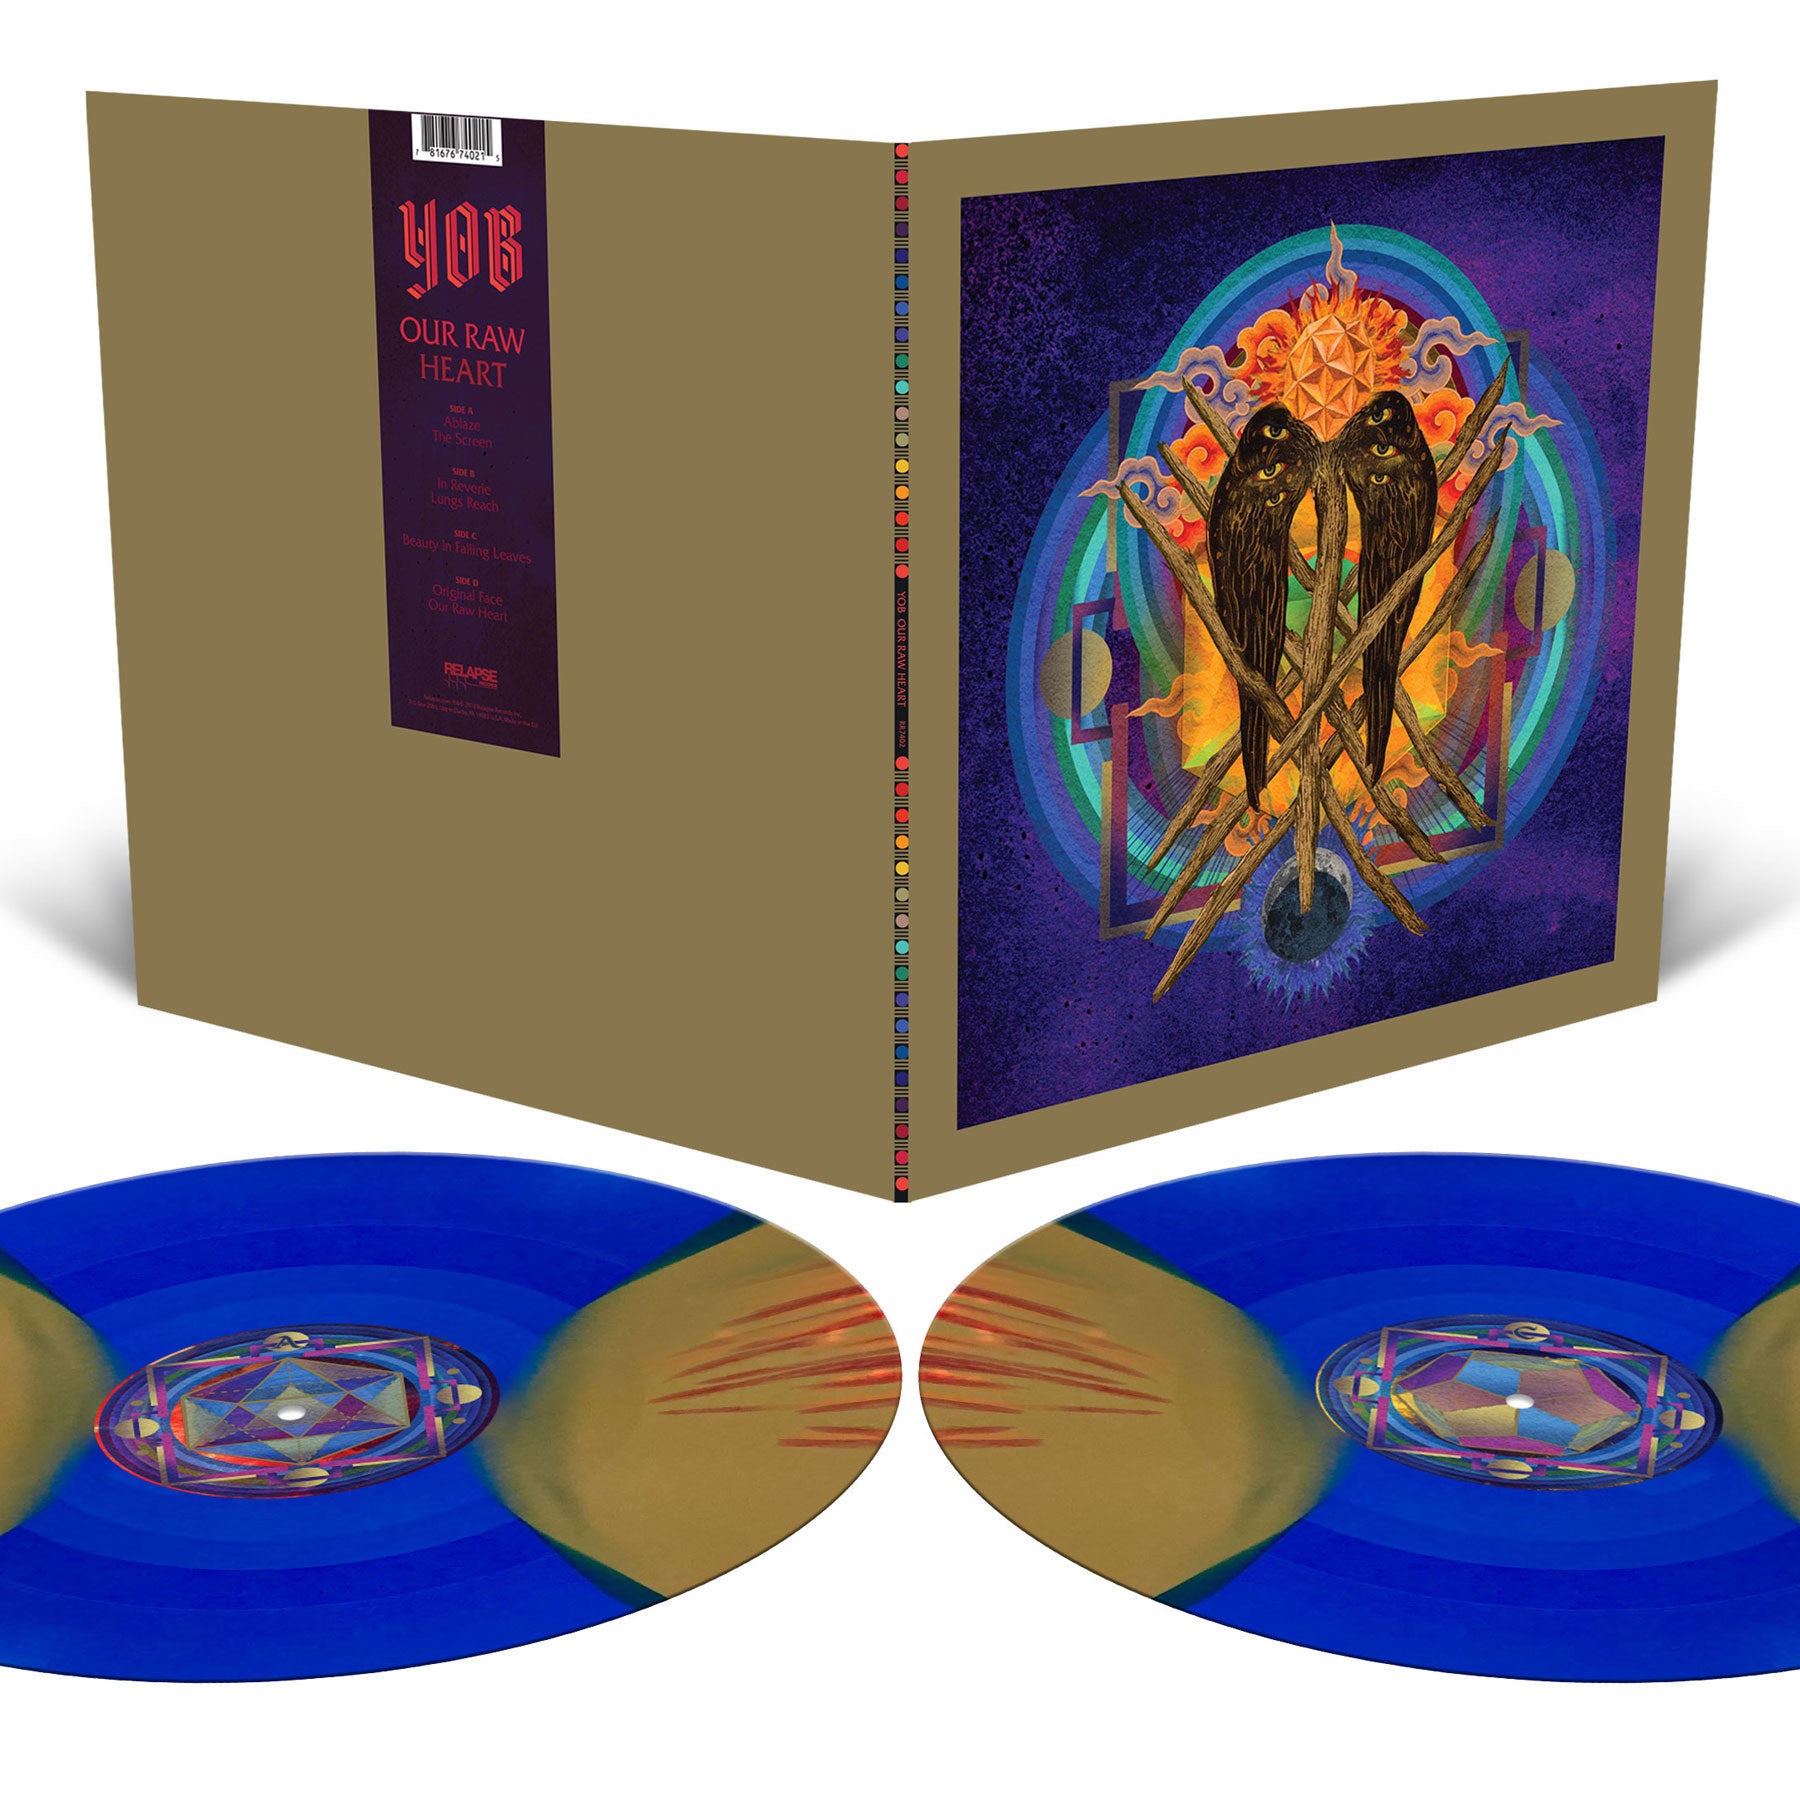 YOB "Our Raw Heart" 2x12"